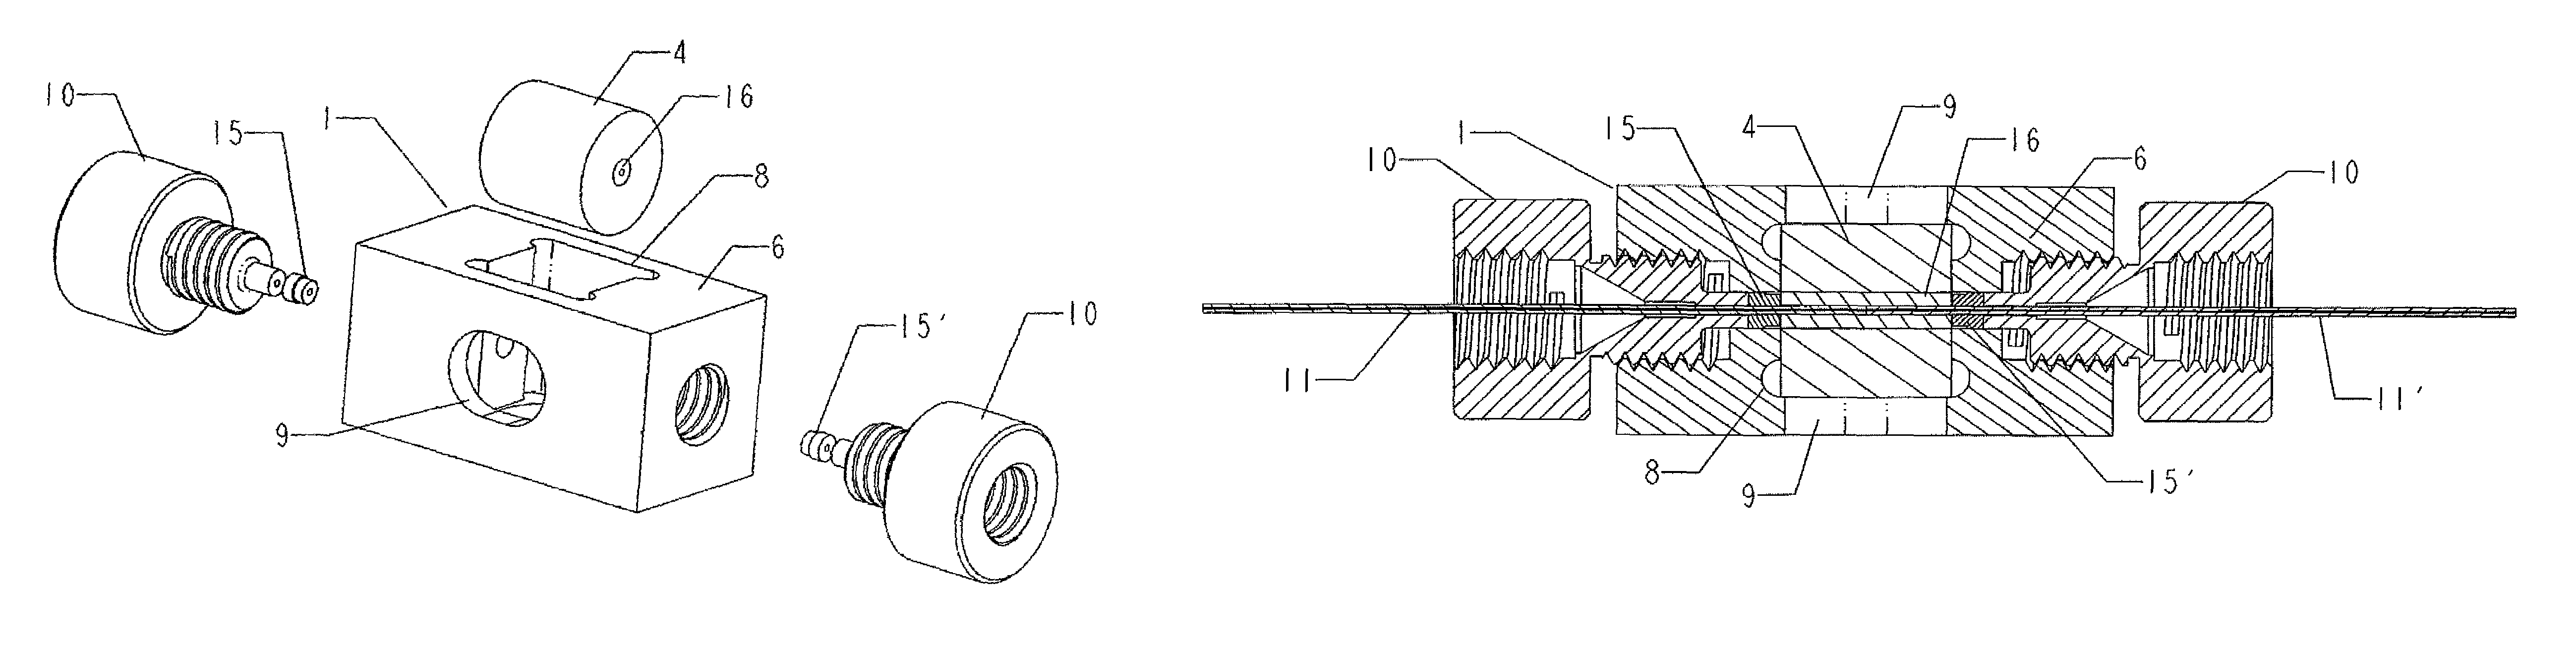 Method and apparatus for connecting small diameter tubing